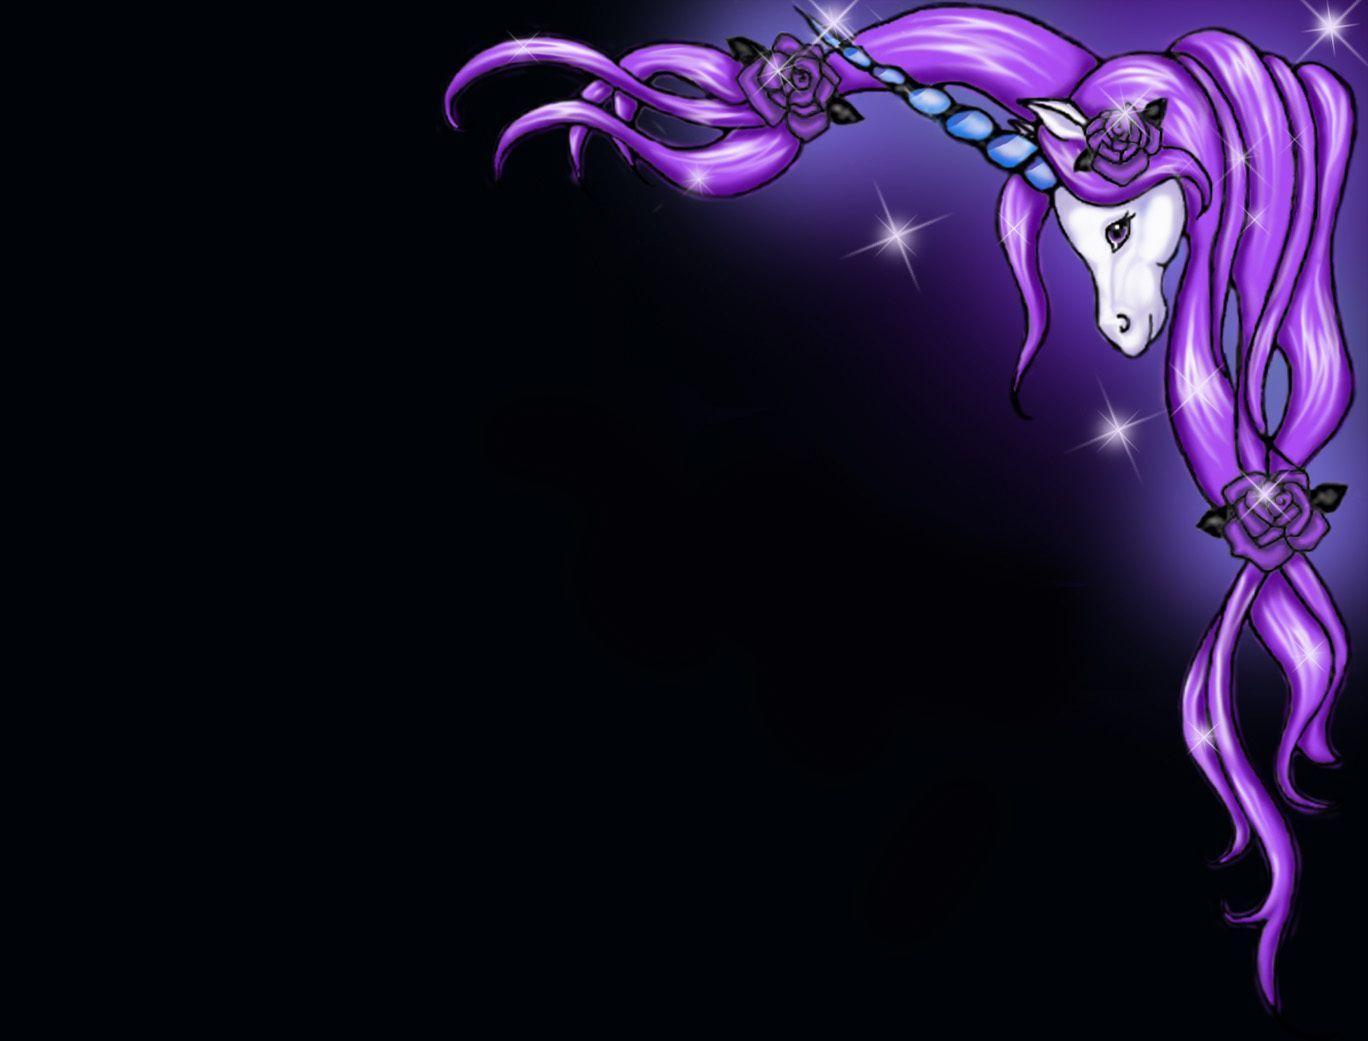 Cool Purple and Black Backgrounds, wallpaper, Cool Purple and